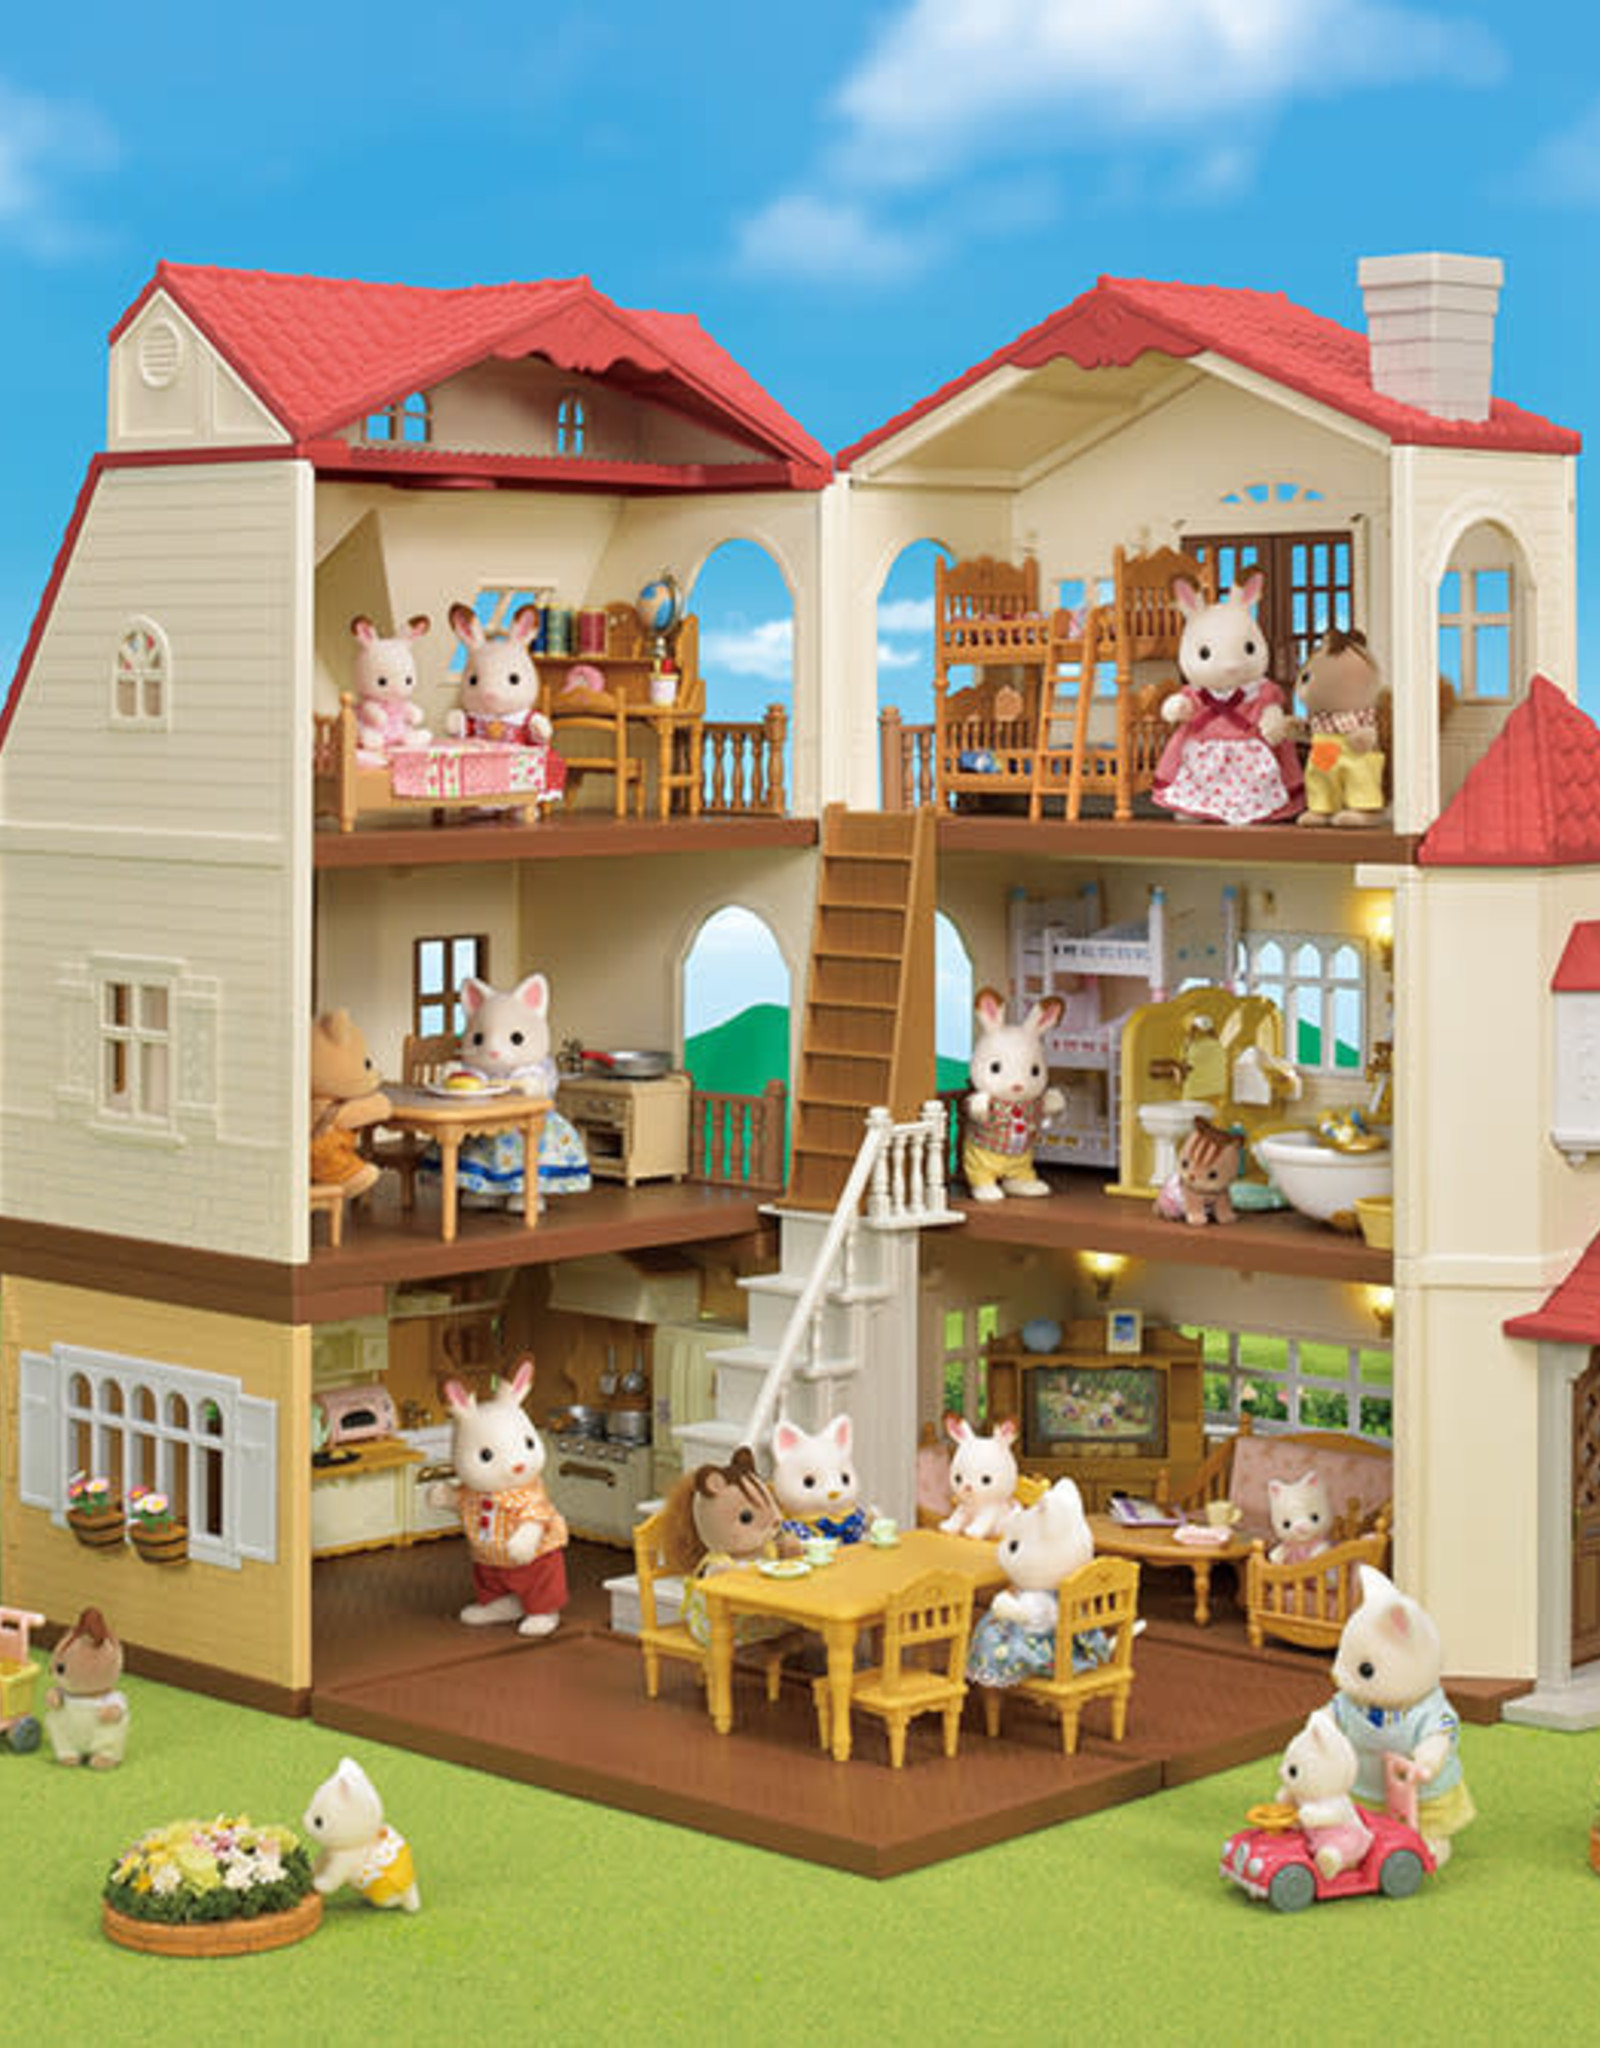 Calico Critters Red Roof Grand Mansion Gift Set *Not available for shipping. Pick up only.